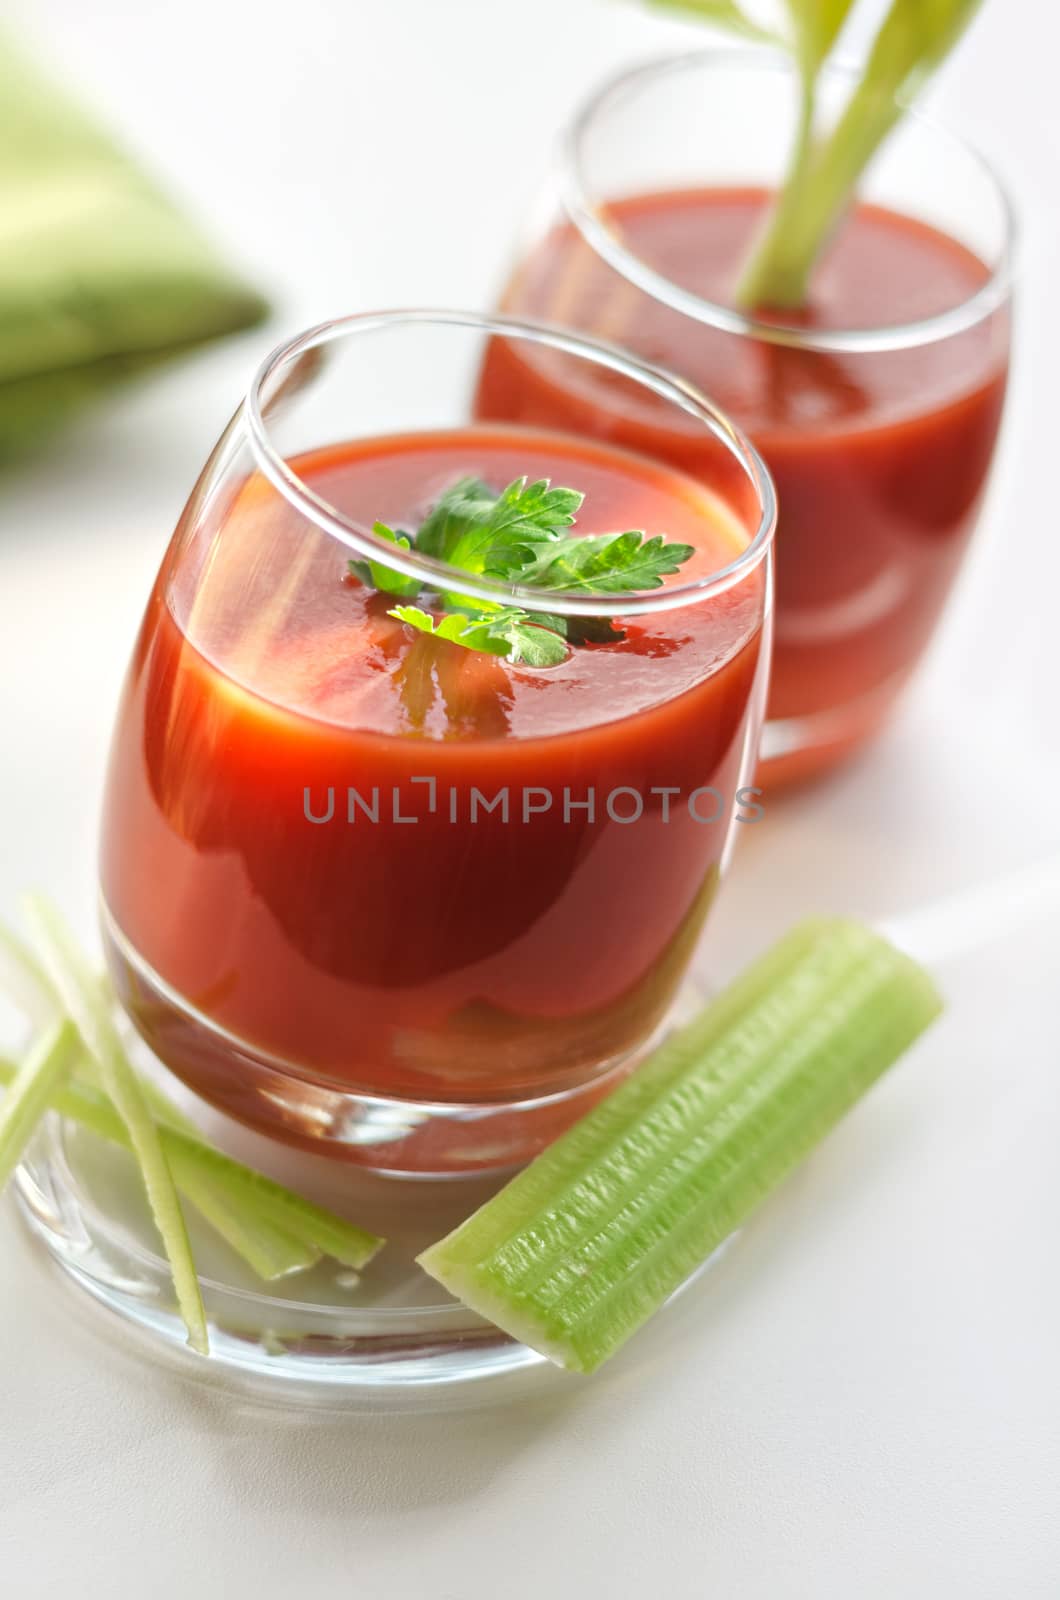 Two glasses of tomato juice and slices of celery, morning, bokeh. Defocused background